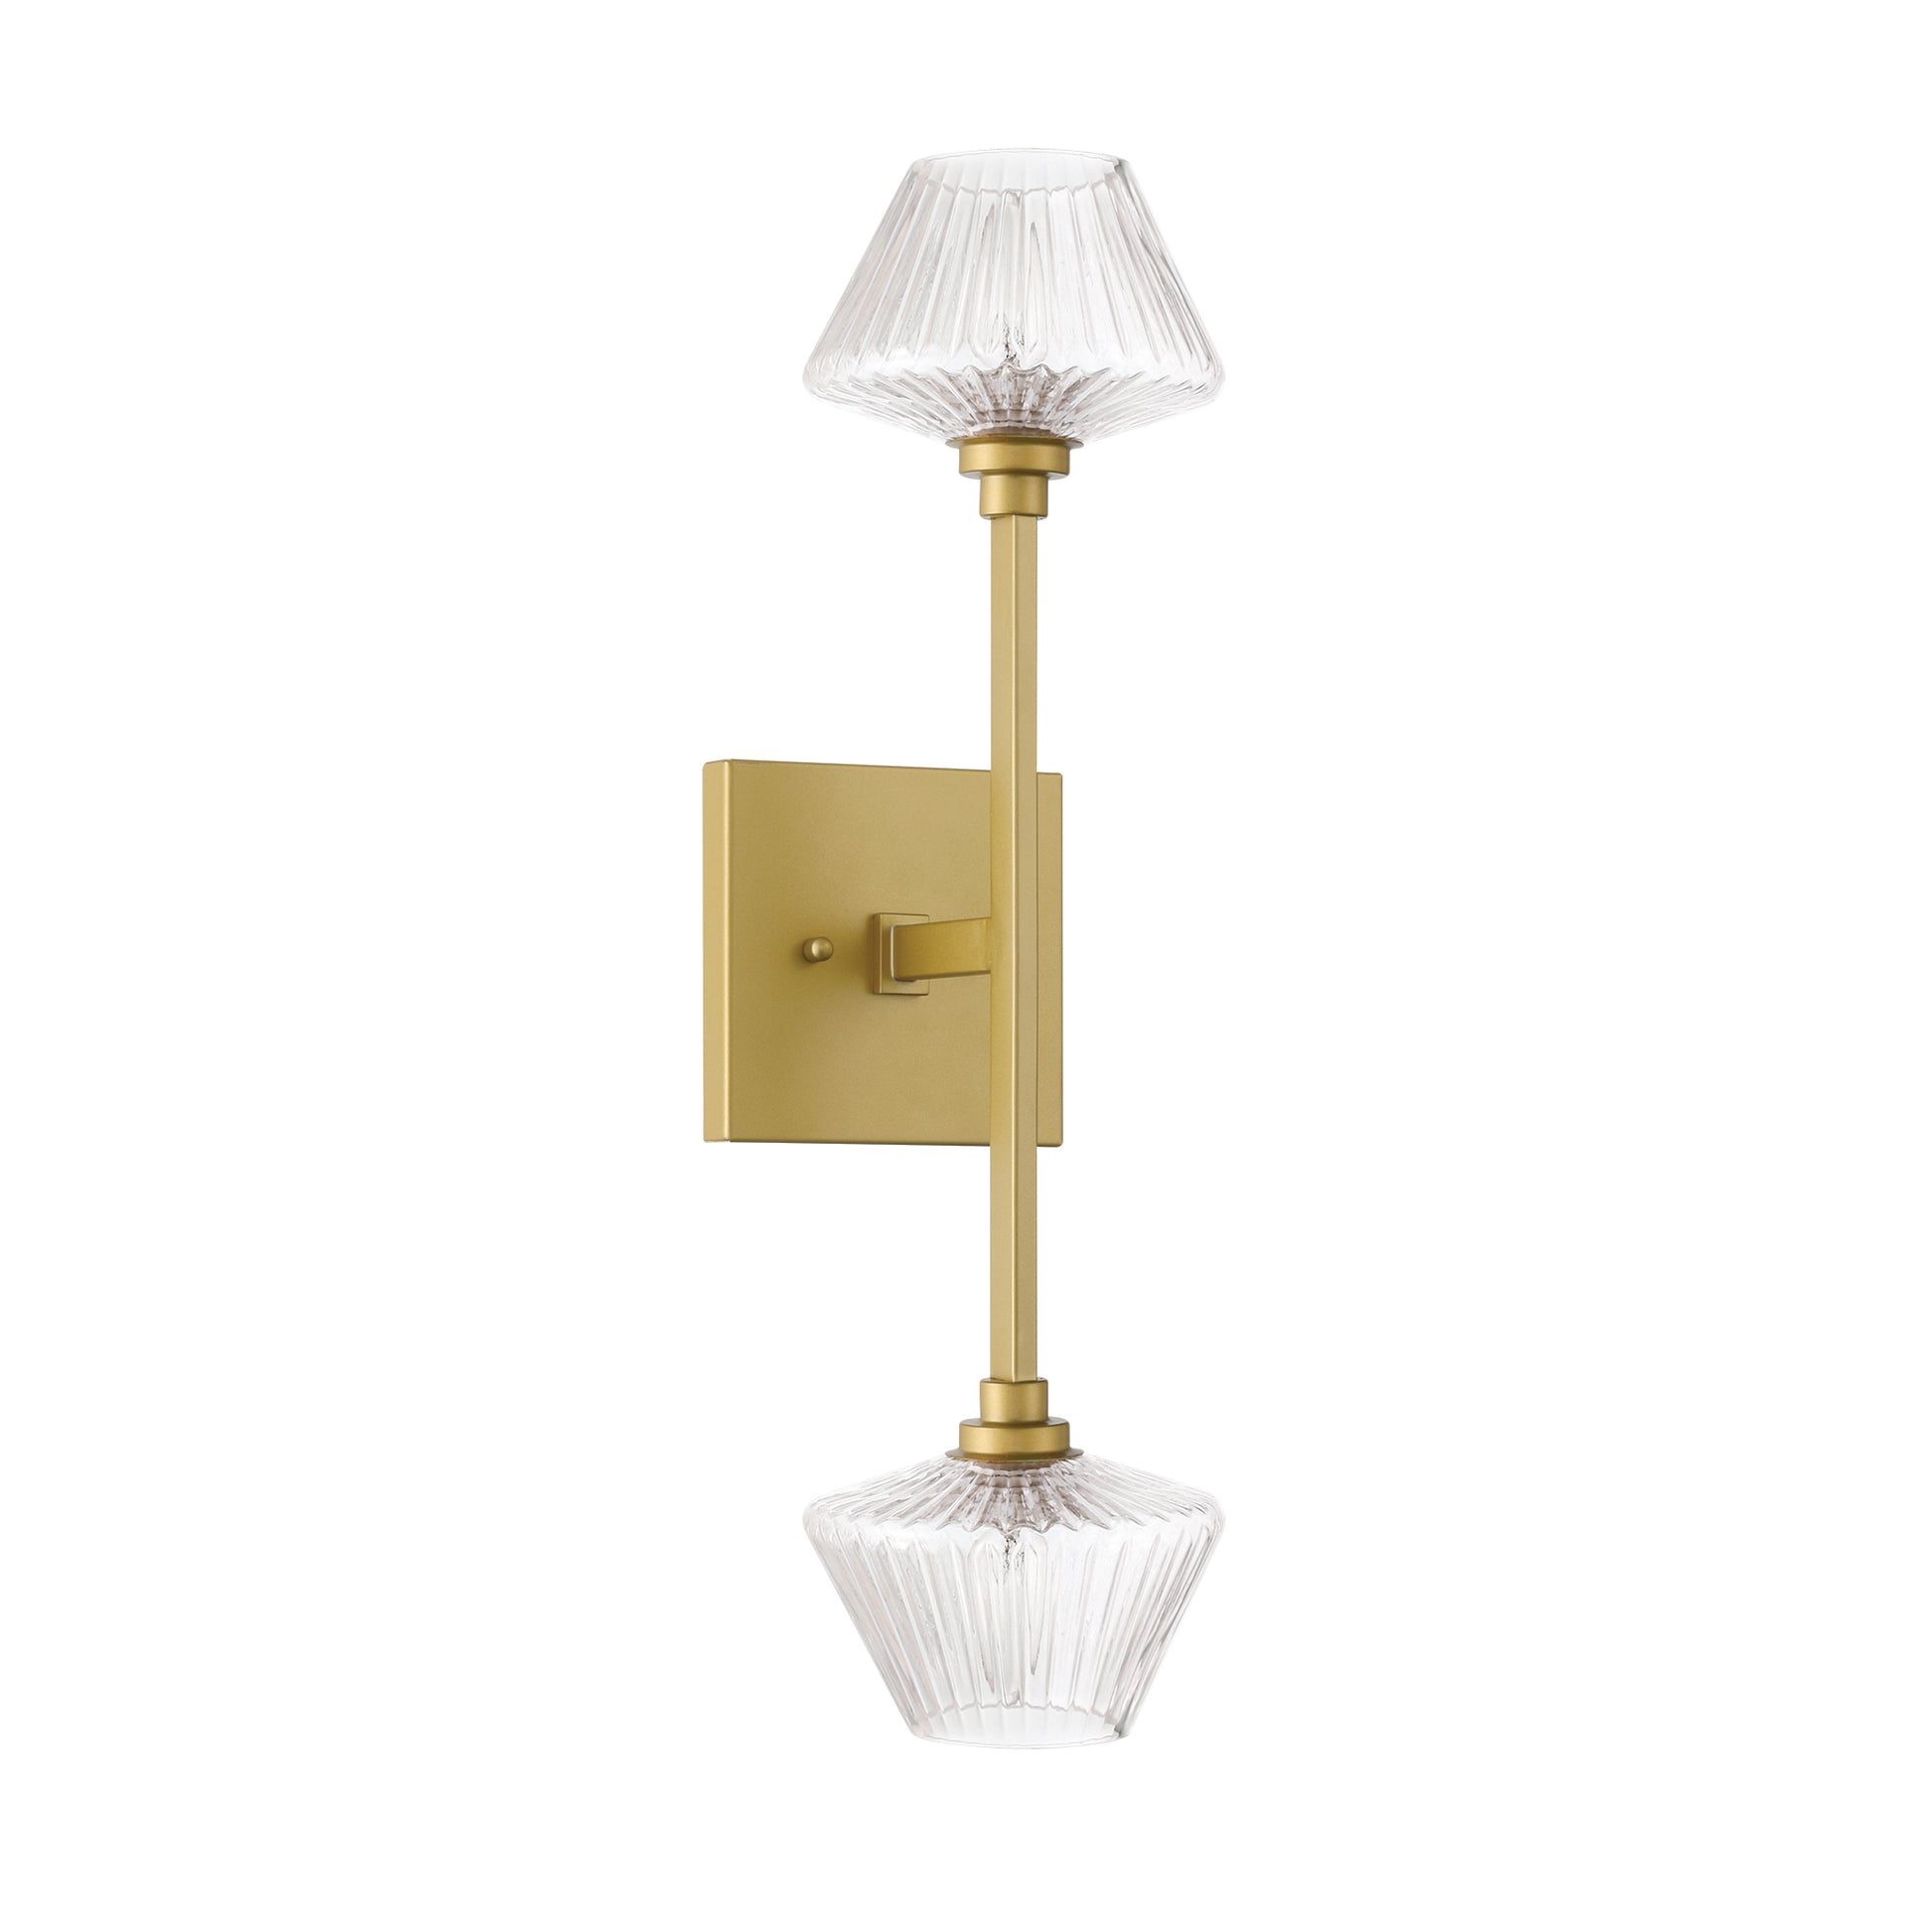 2 light gold glass wallchiere (6) by ACROMA